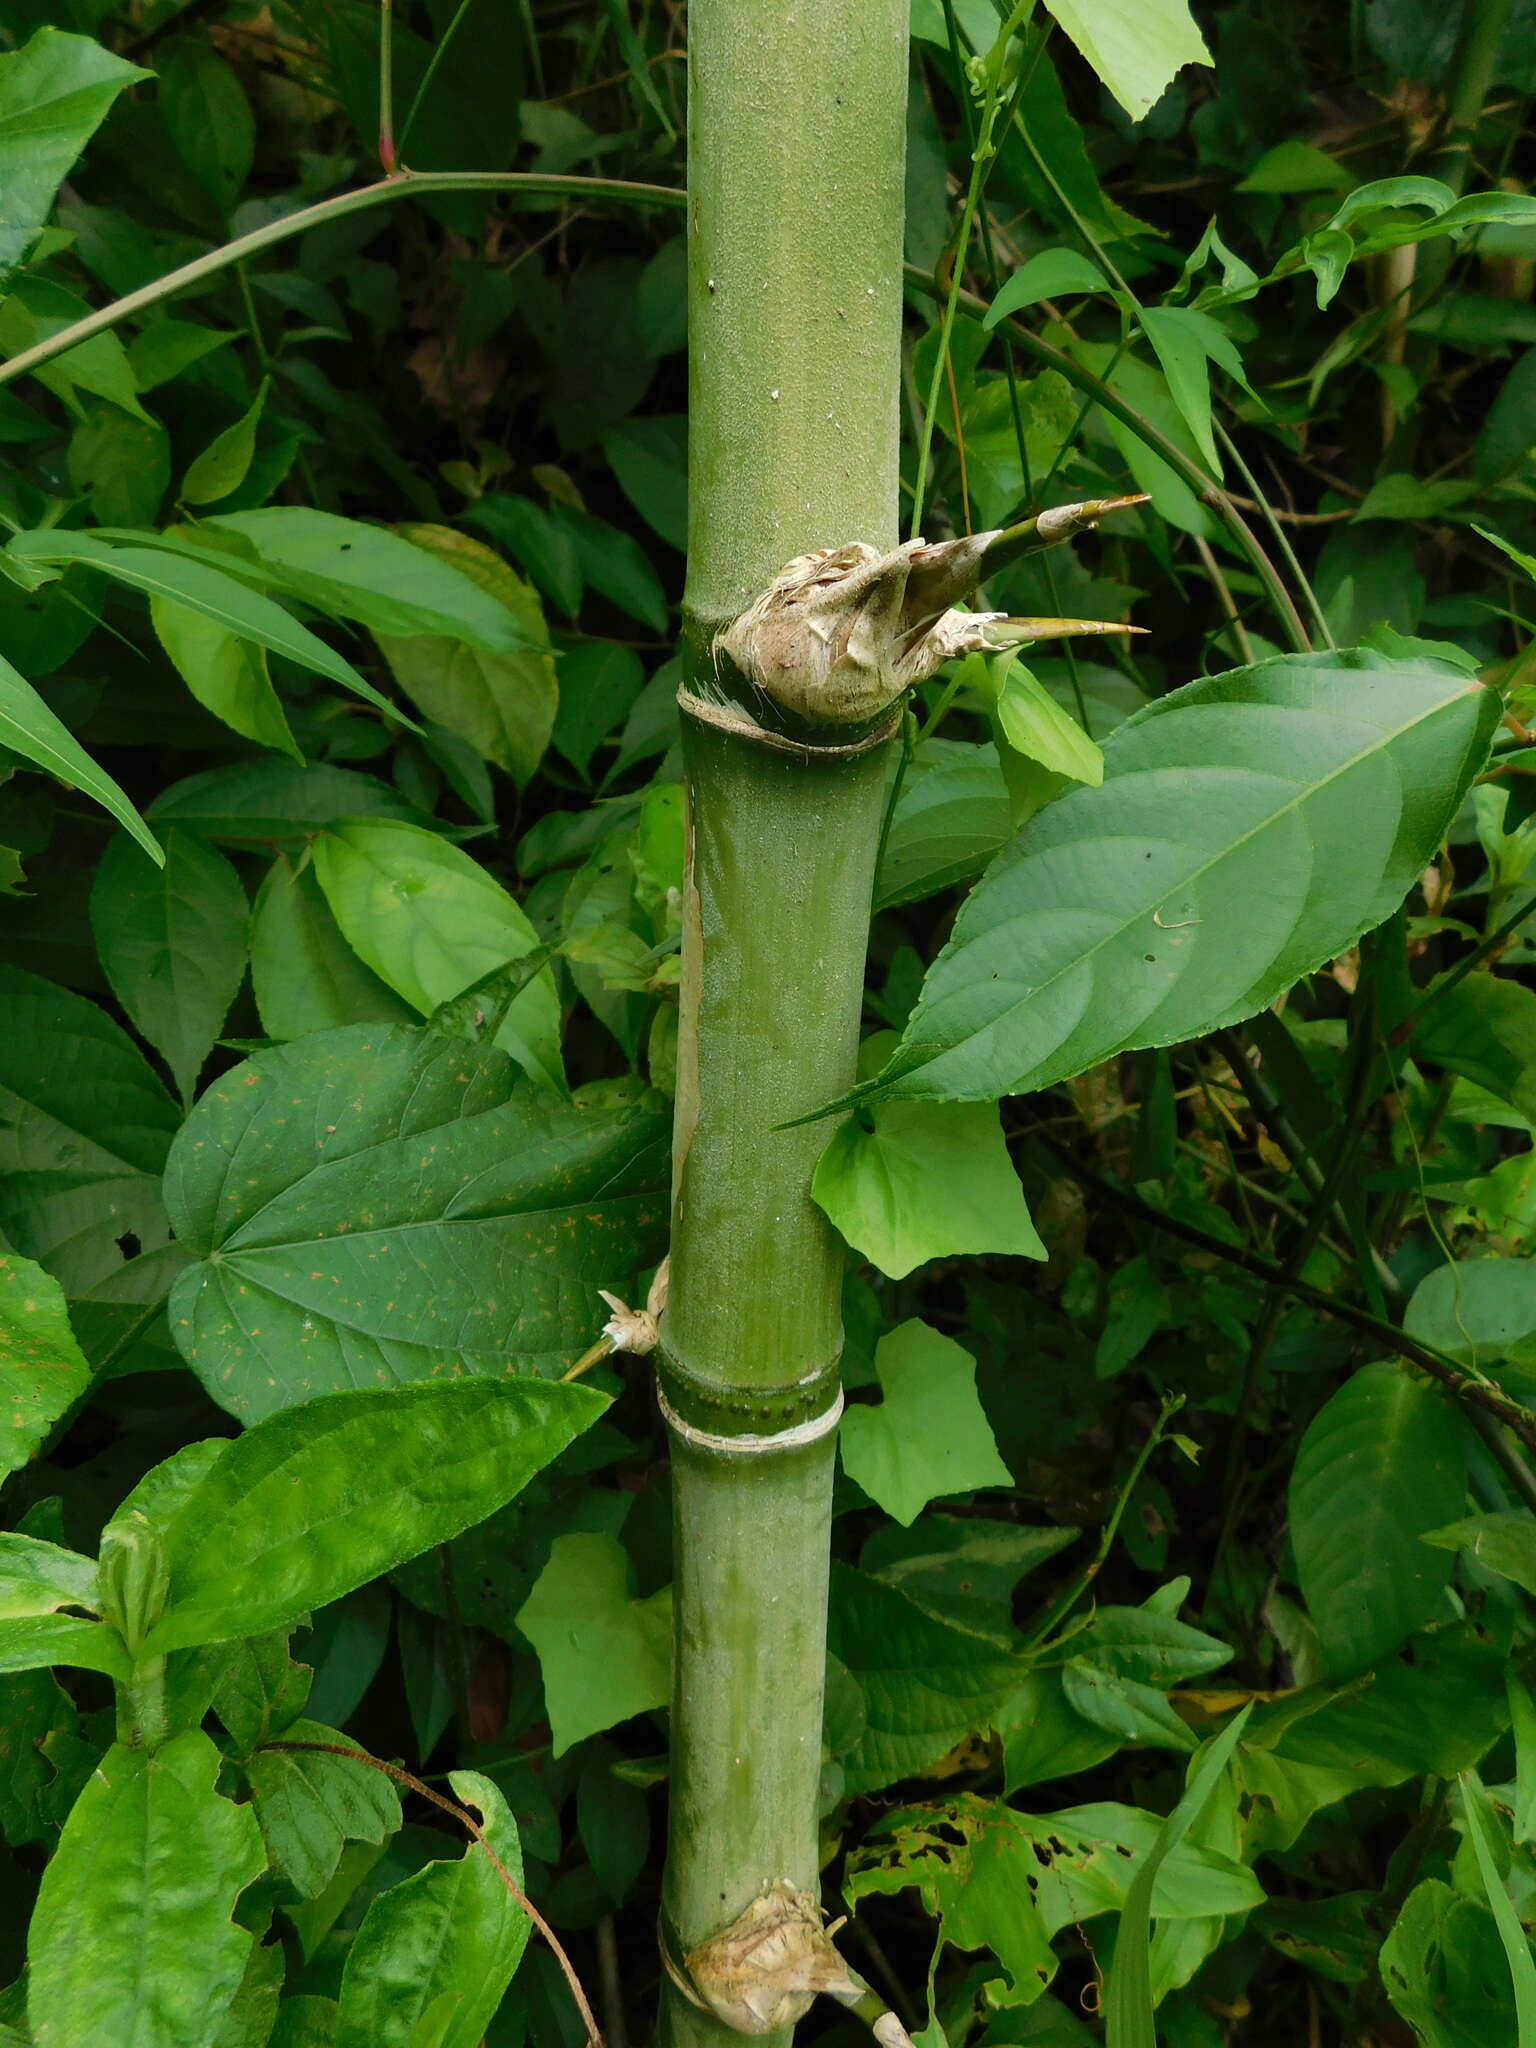 Image of American long-leaved bamboo